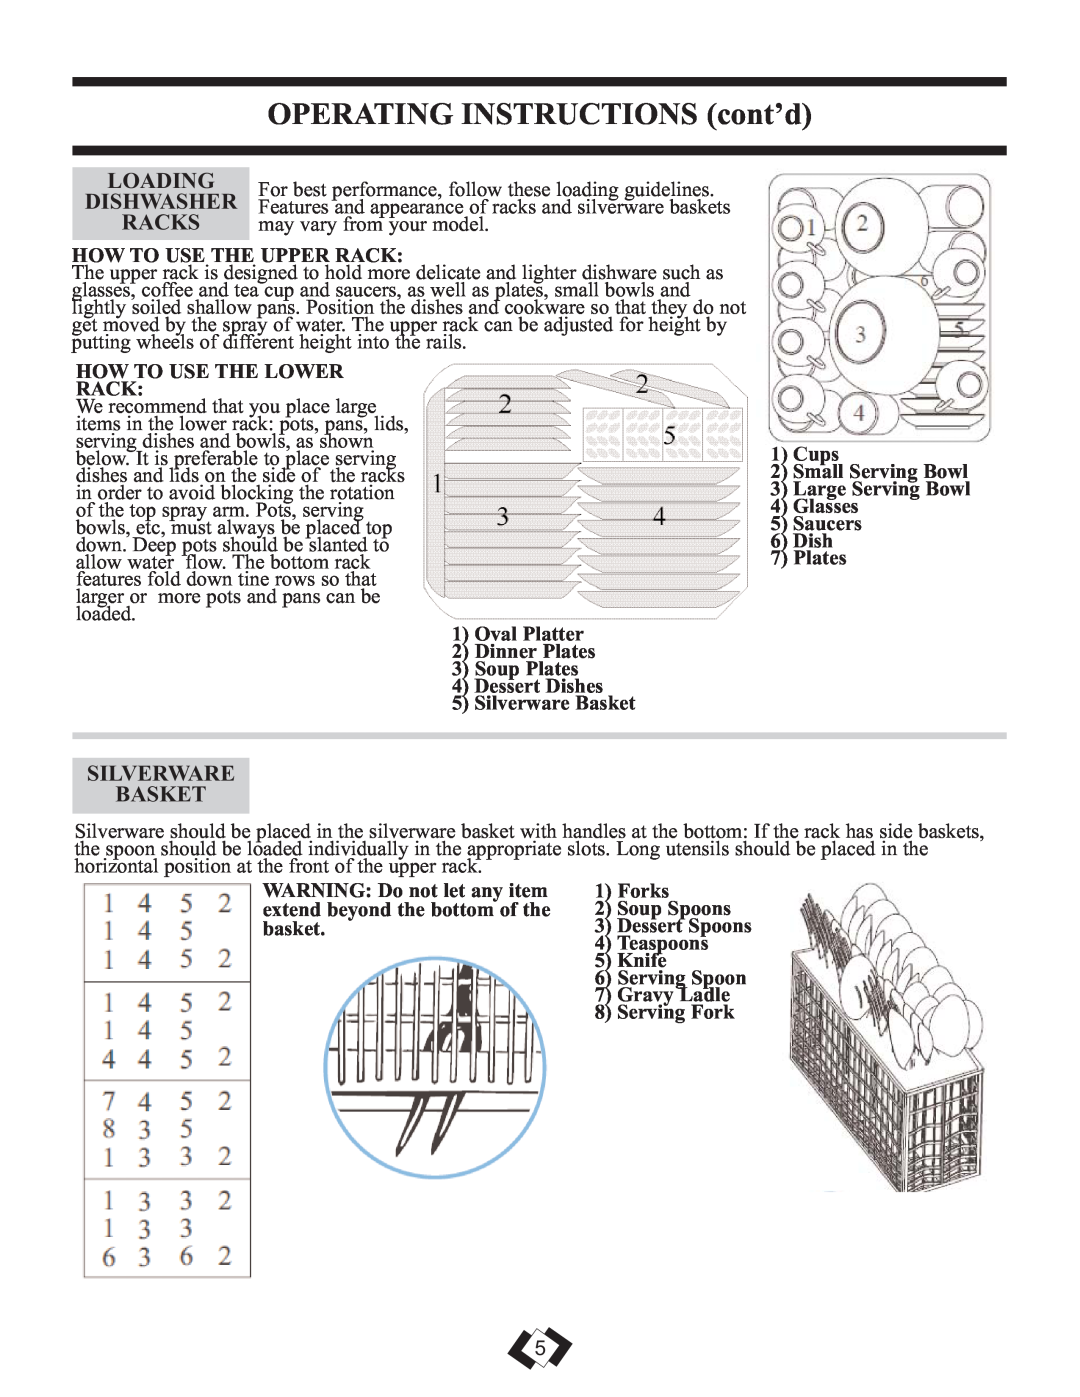 Danby DDW1899BLS OPERATING INSTRUCTIONS cont’d, Loading, Dishwasher, Racks, Silverware Basket, may vary from your model 